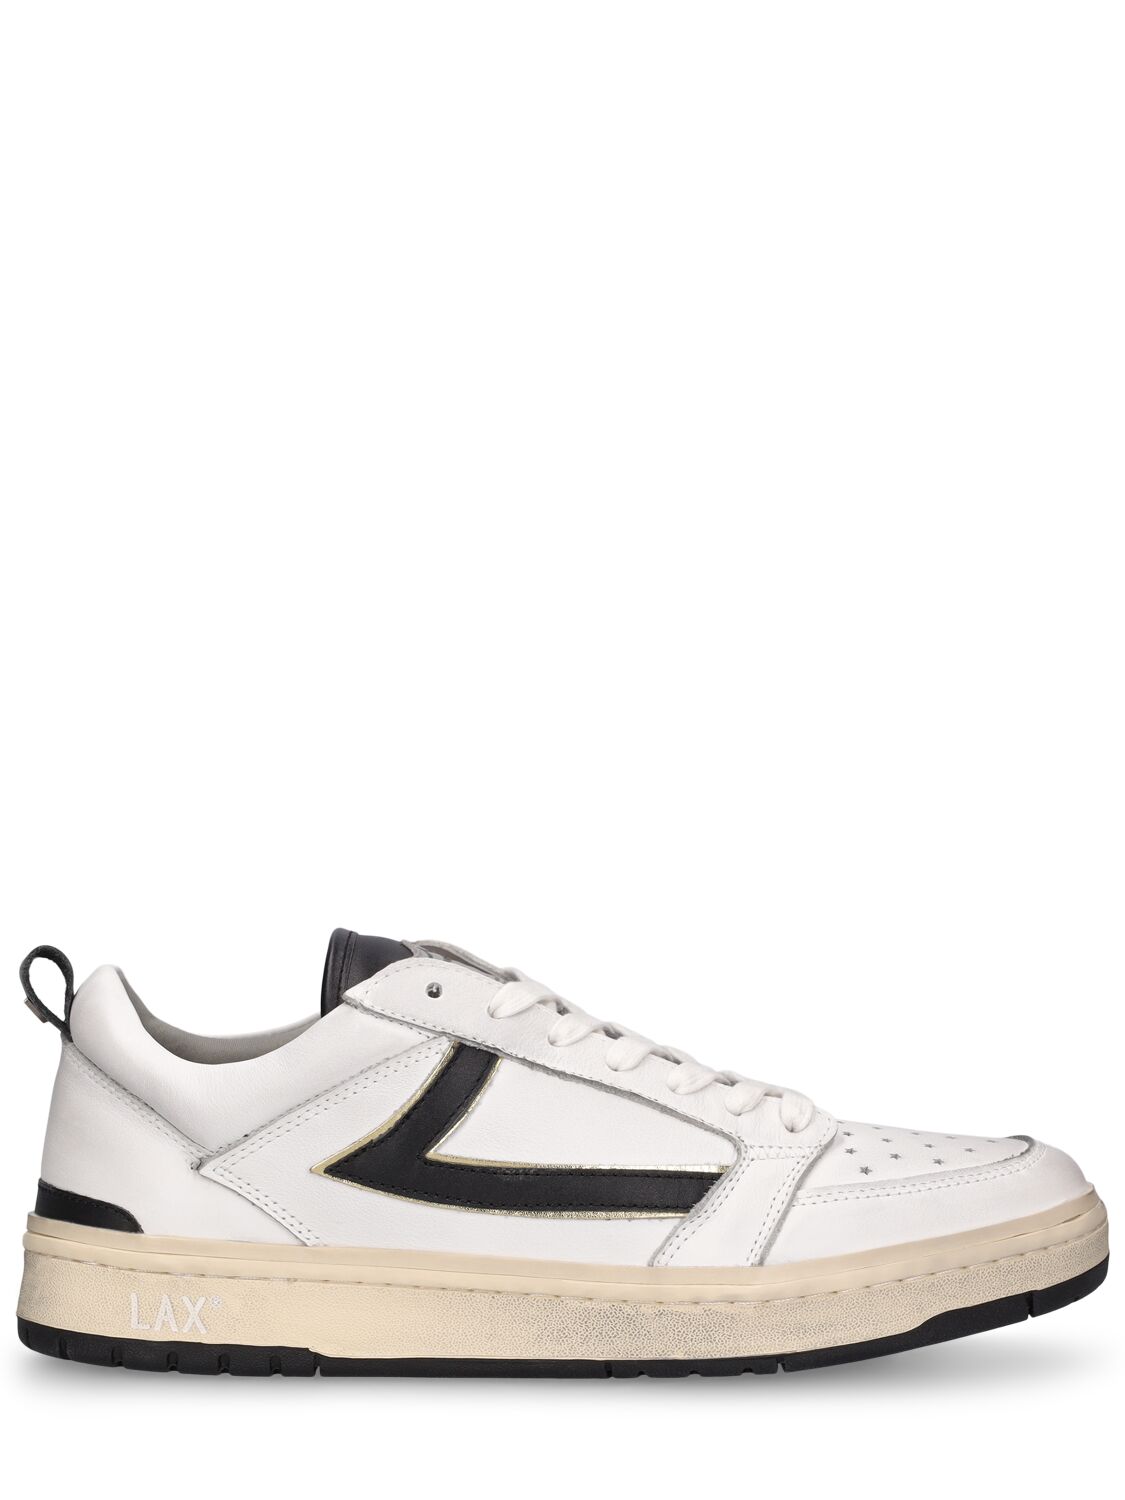 Htc Los Angeles Starlight Leather Low Top Sneakers In White